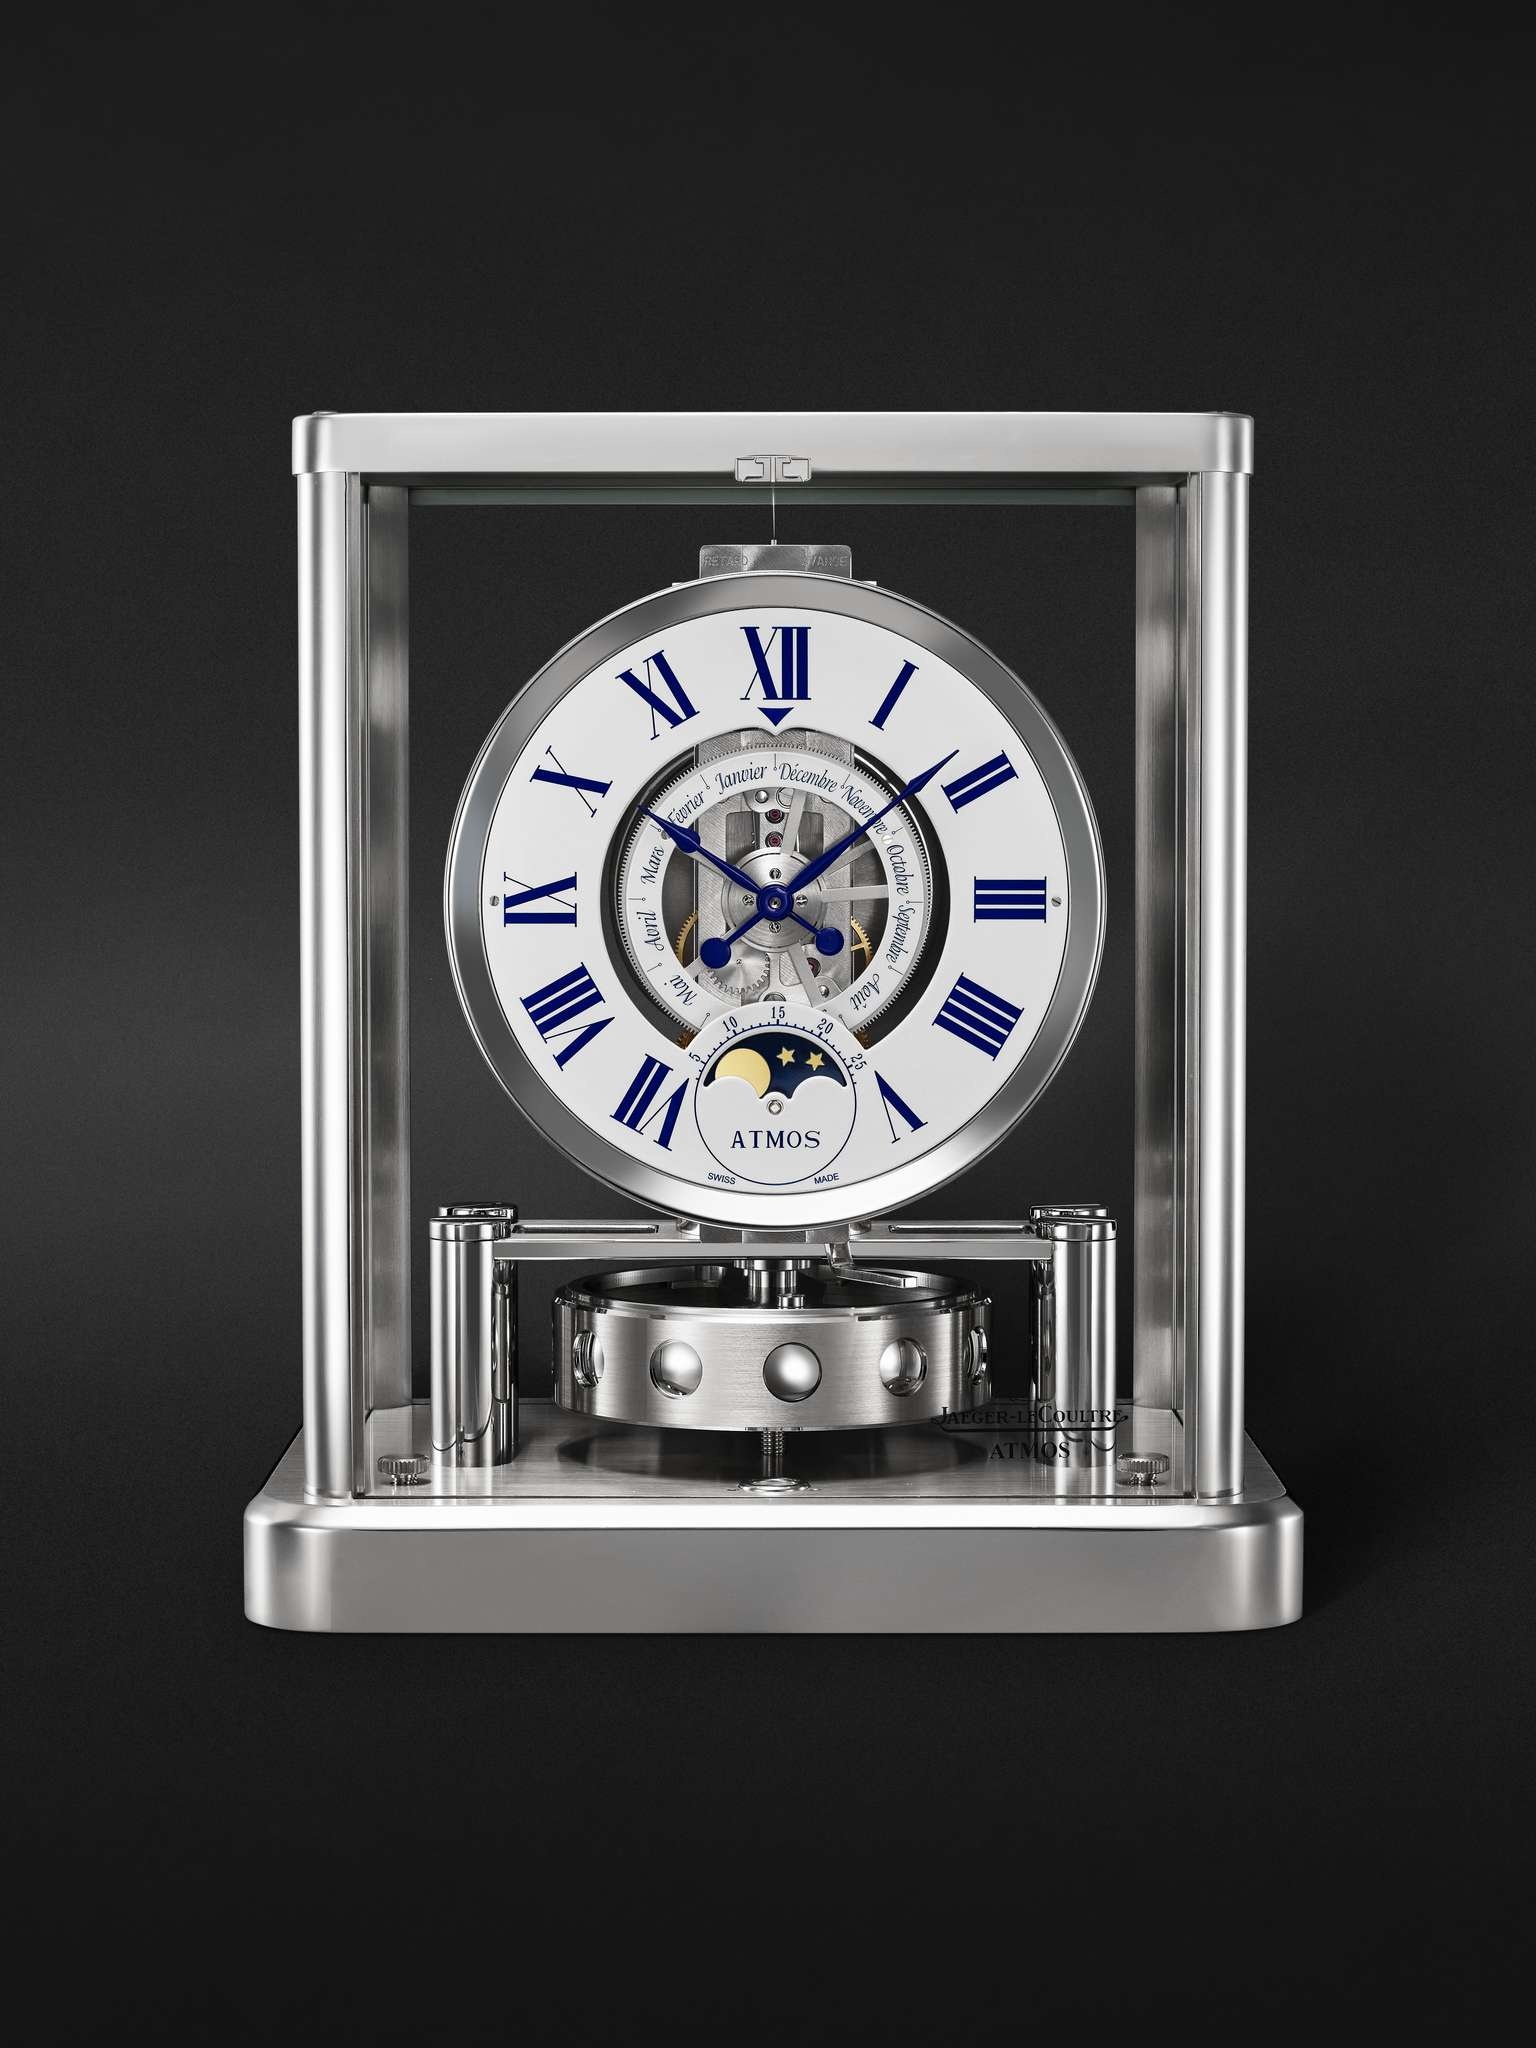 Atmos Classique Phases de Lune Perpetual Automatic Rhodium-Plated Table Clock, Ref. No. JLQ5112202 - 1